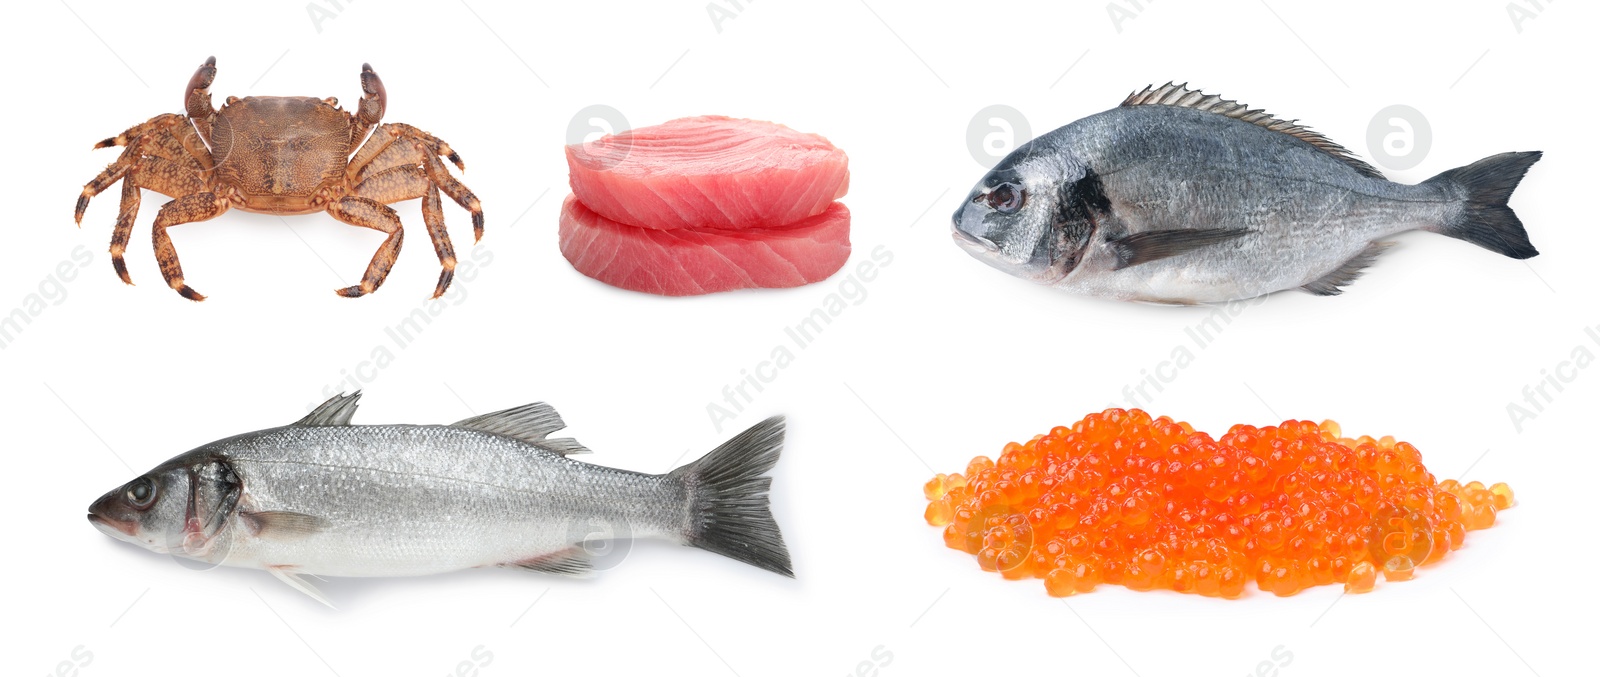 Image of Dorado fish, crab, sea bass, pieces of raw tuna and red caviar isolated on white, set